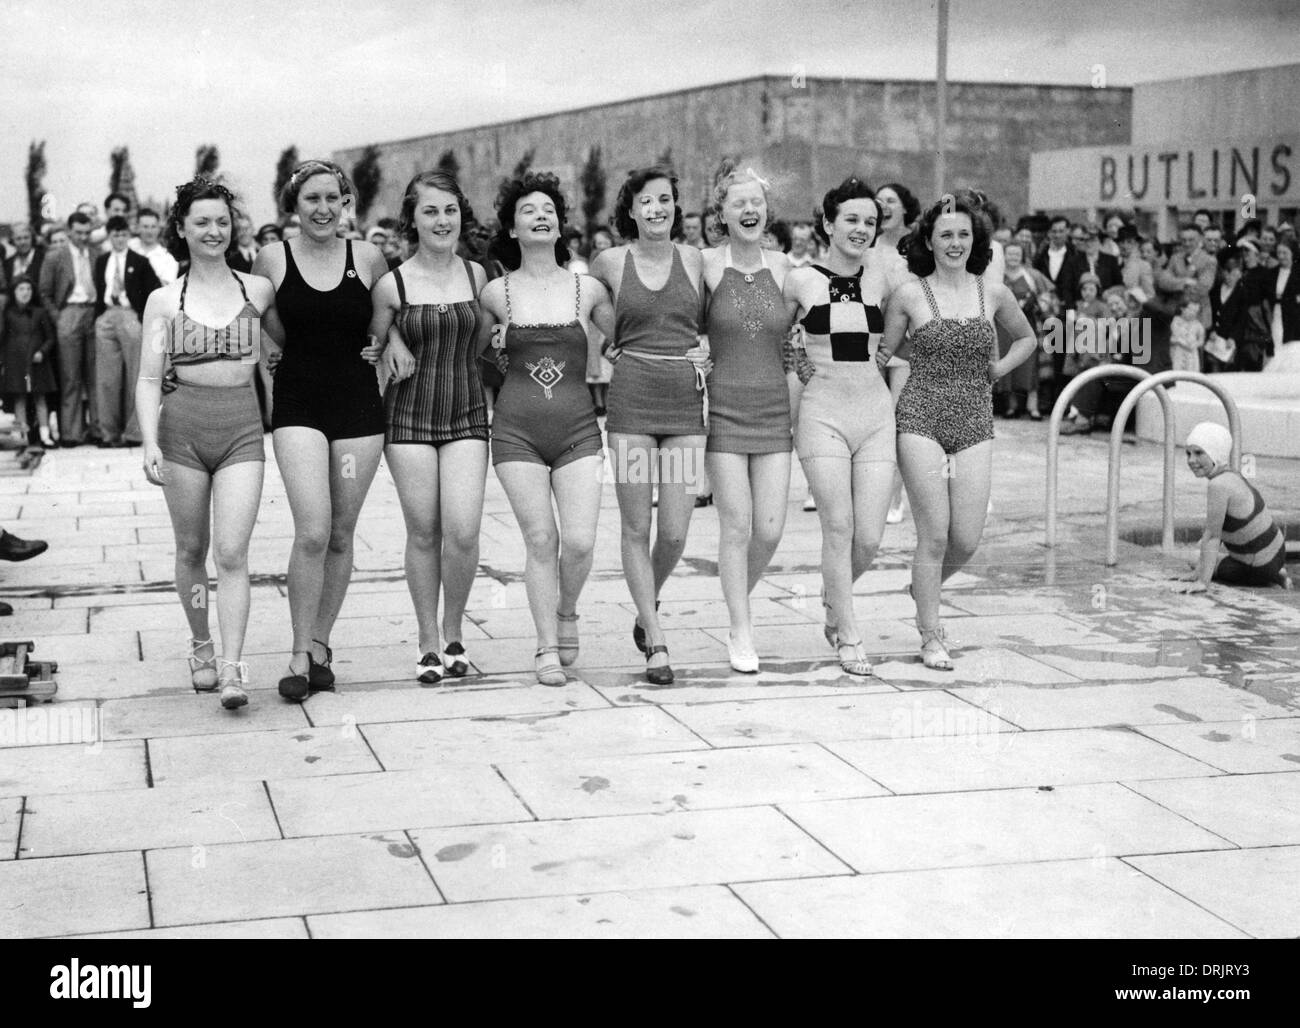 A group of women in swimsuits at Butlins holiday camp Stock Photo - Alamy